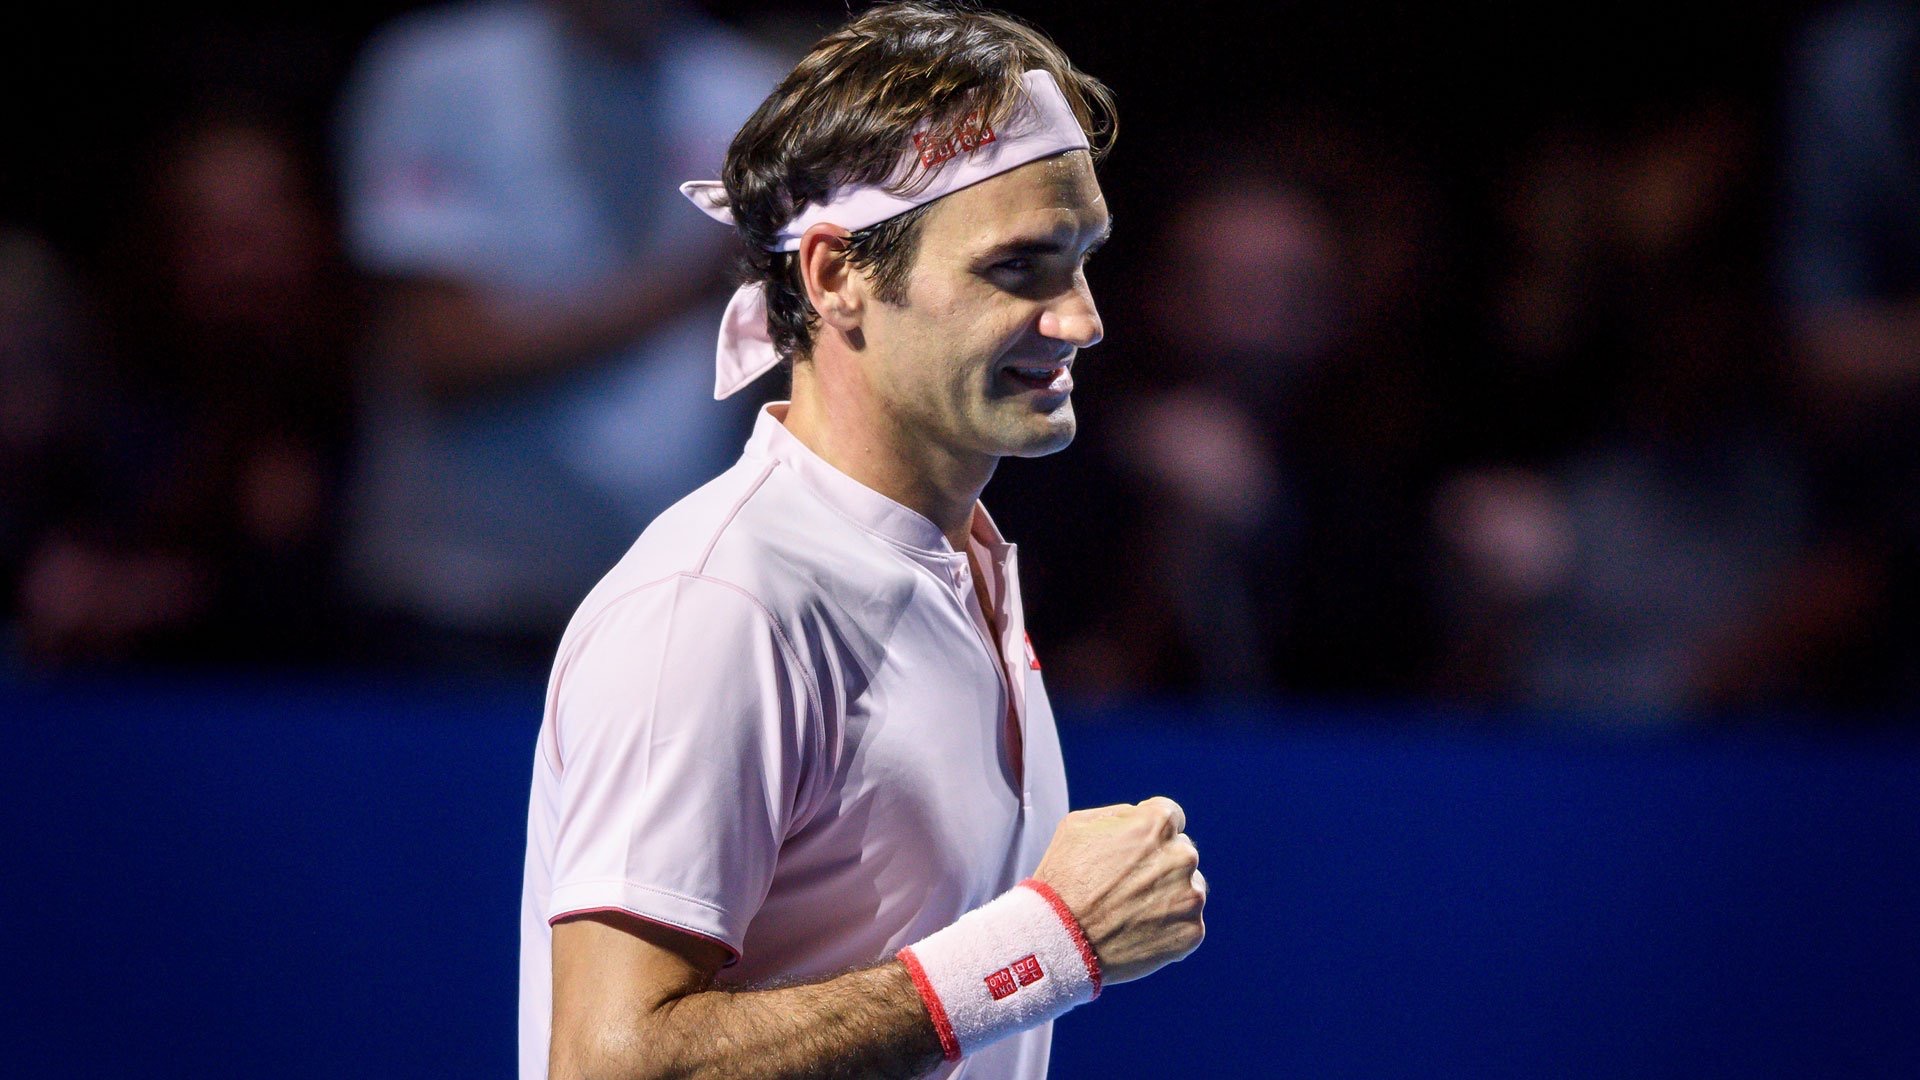 Federer Advances to 12th Consecutive Swiss Indoors Final